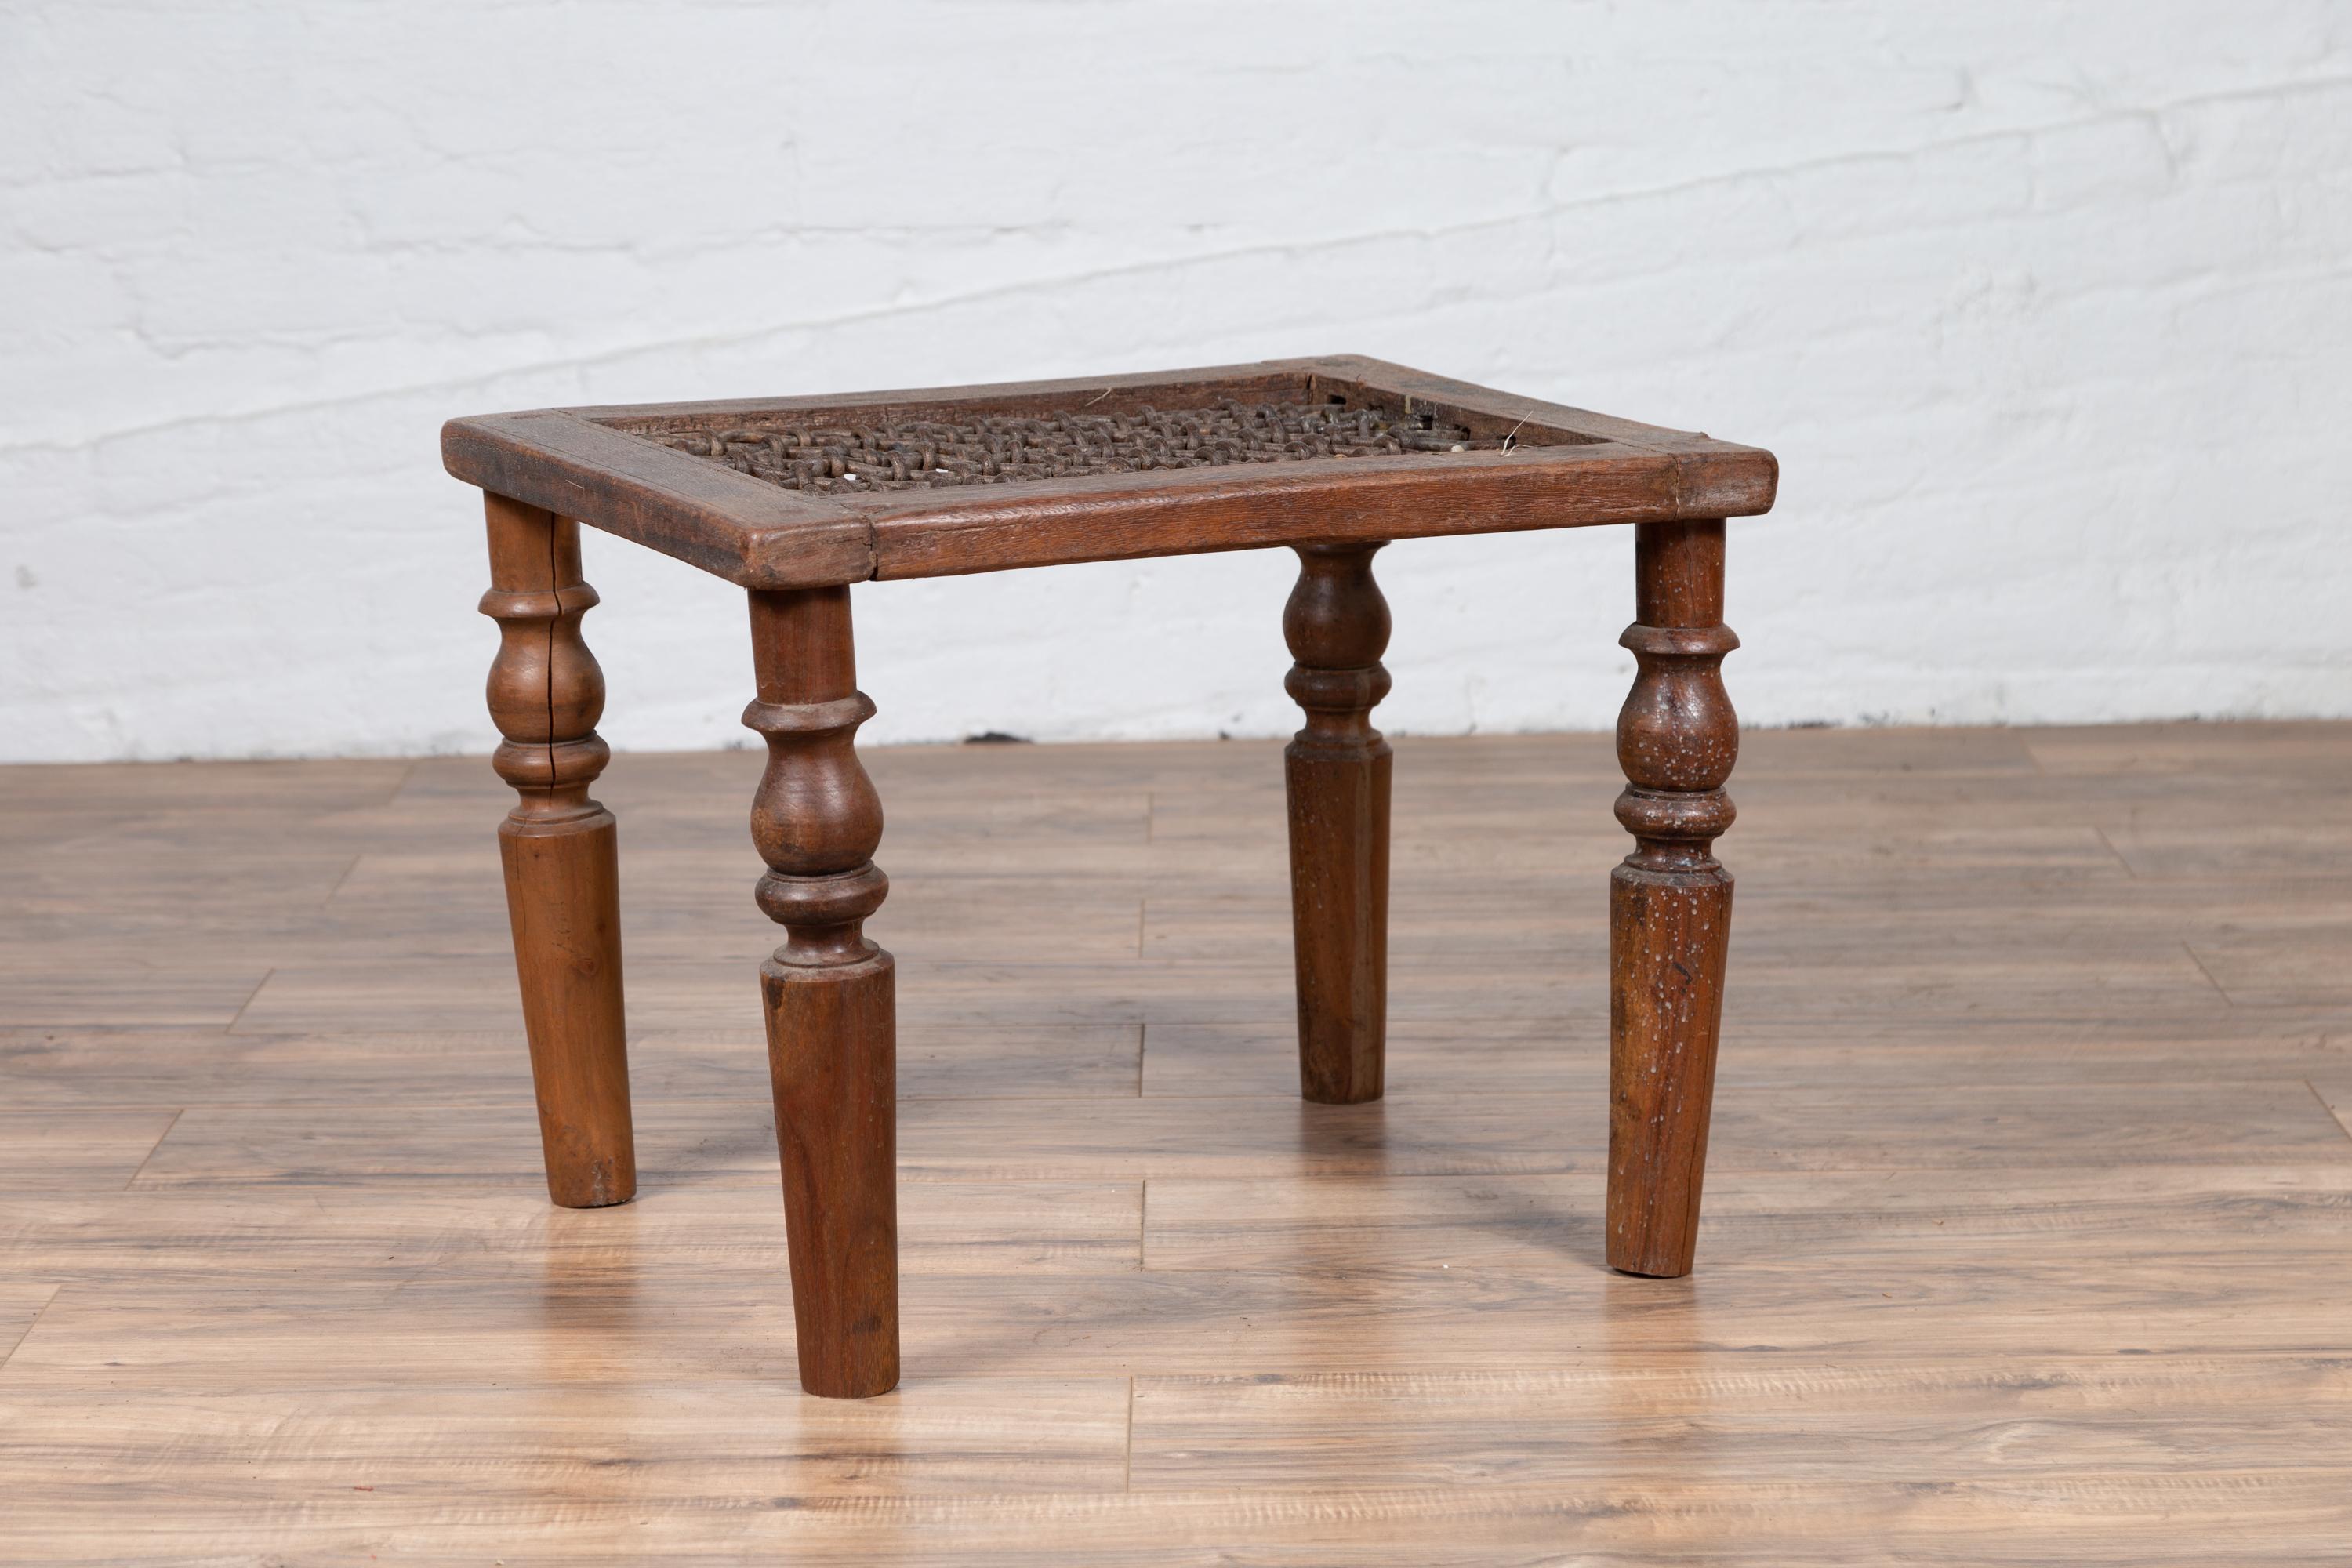 Antique Indian Window Grate Made into a Coffee Table with Turned Baluster Legs In Fair Condition For Sale In Yonkers, NY